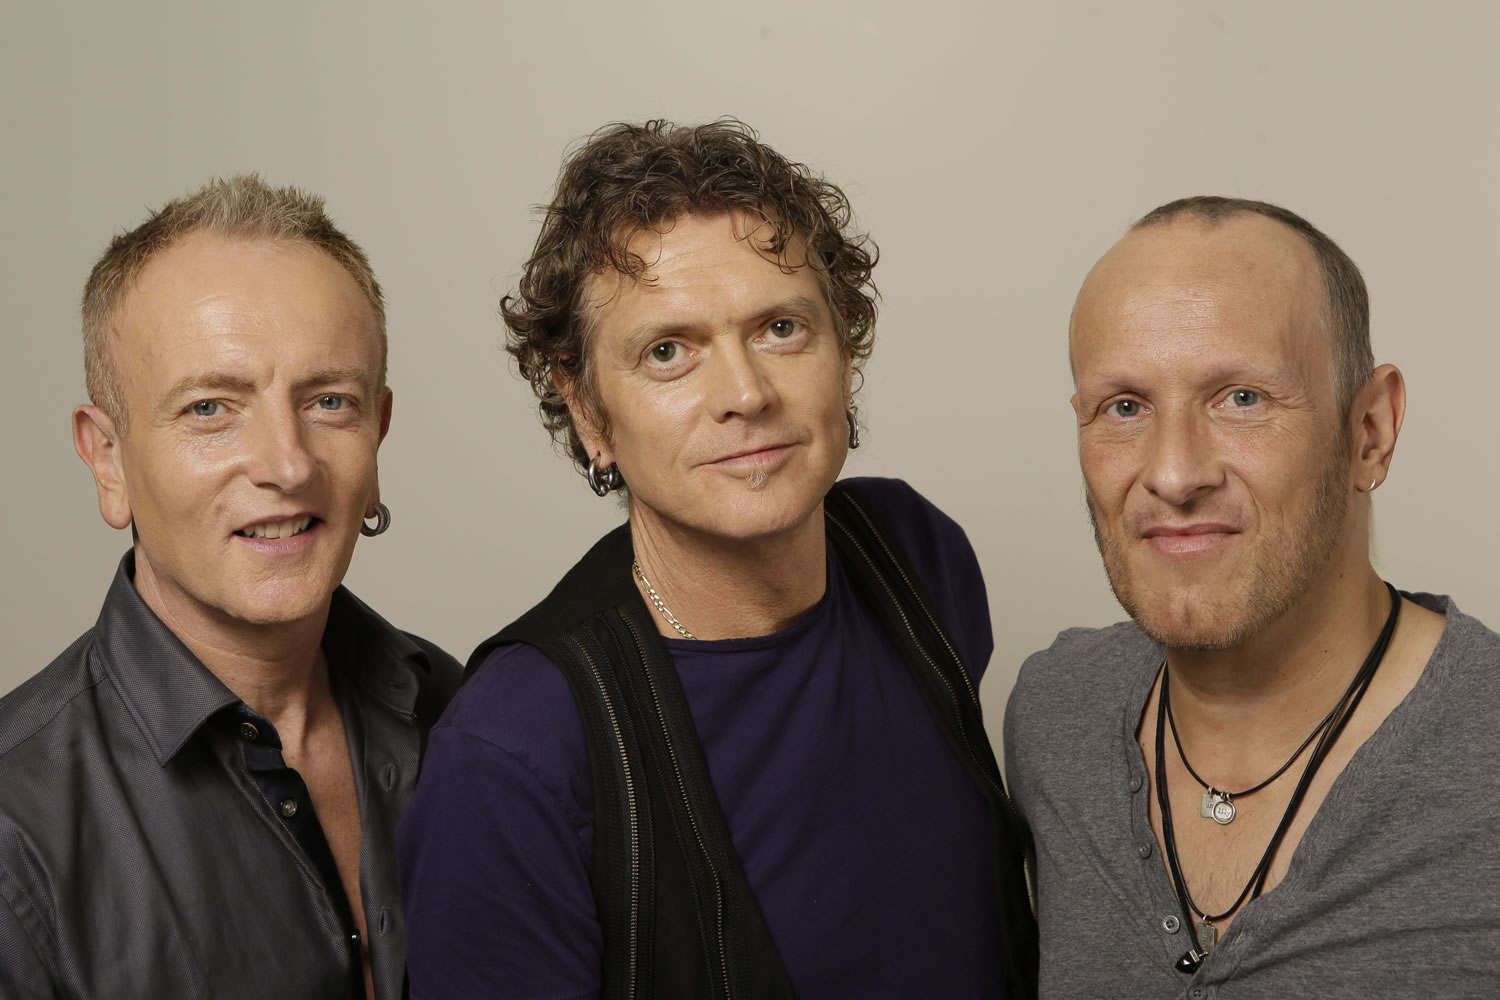 In this photo taken Wednesday, Sept. 25, 2013, British rock group, Def Leppard, from left, Phil Collen, Rick Allen and Vivian Campbell pose for a photo in Los Angeles. First up, in a year of firsts for the band, is the special-event screening Wednesday, Oct. 1, 2013, (and again on Oct. 8) of their live concert film at theaters nationwide iDef Leppard Viva!